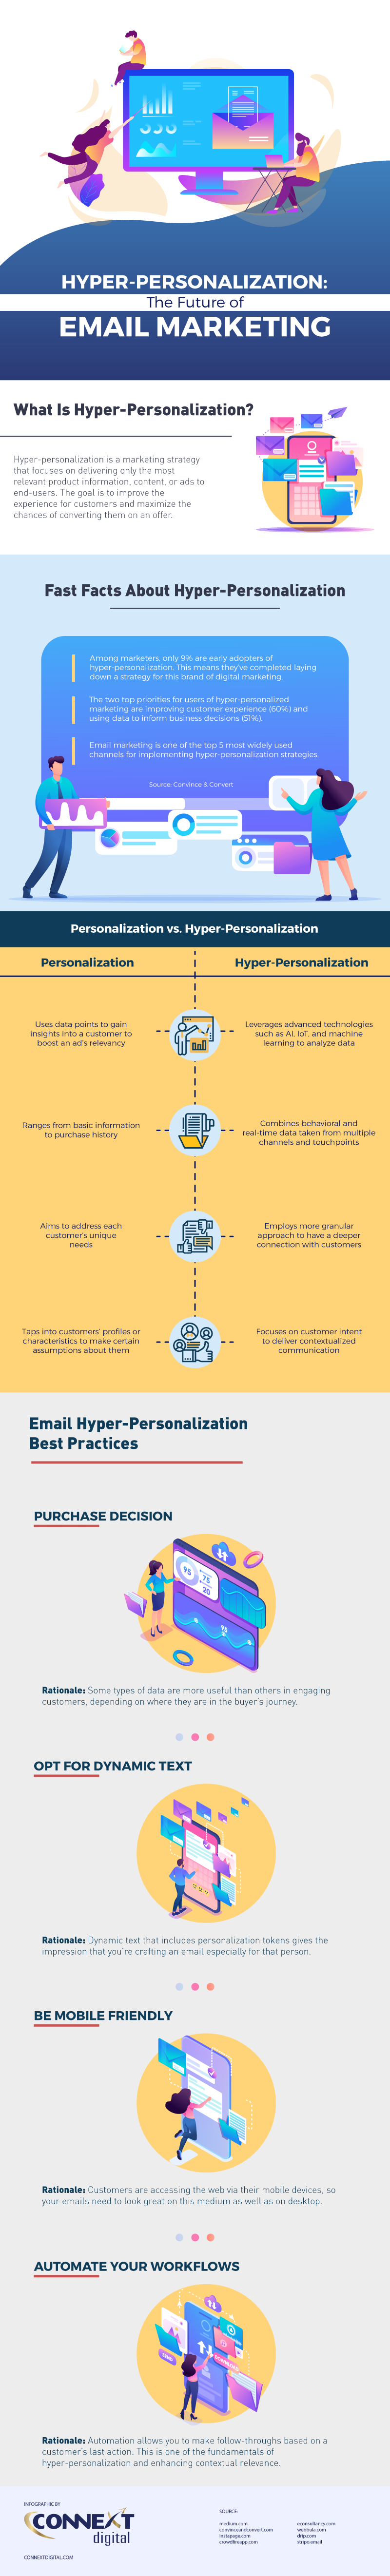 Hyper Personalization - The Future of Email Marketing-Infographic